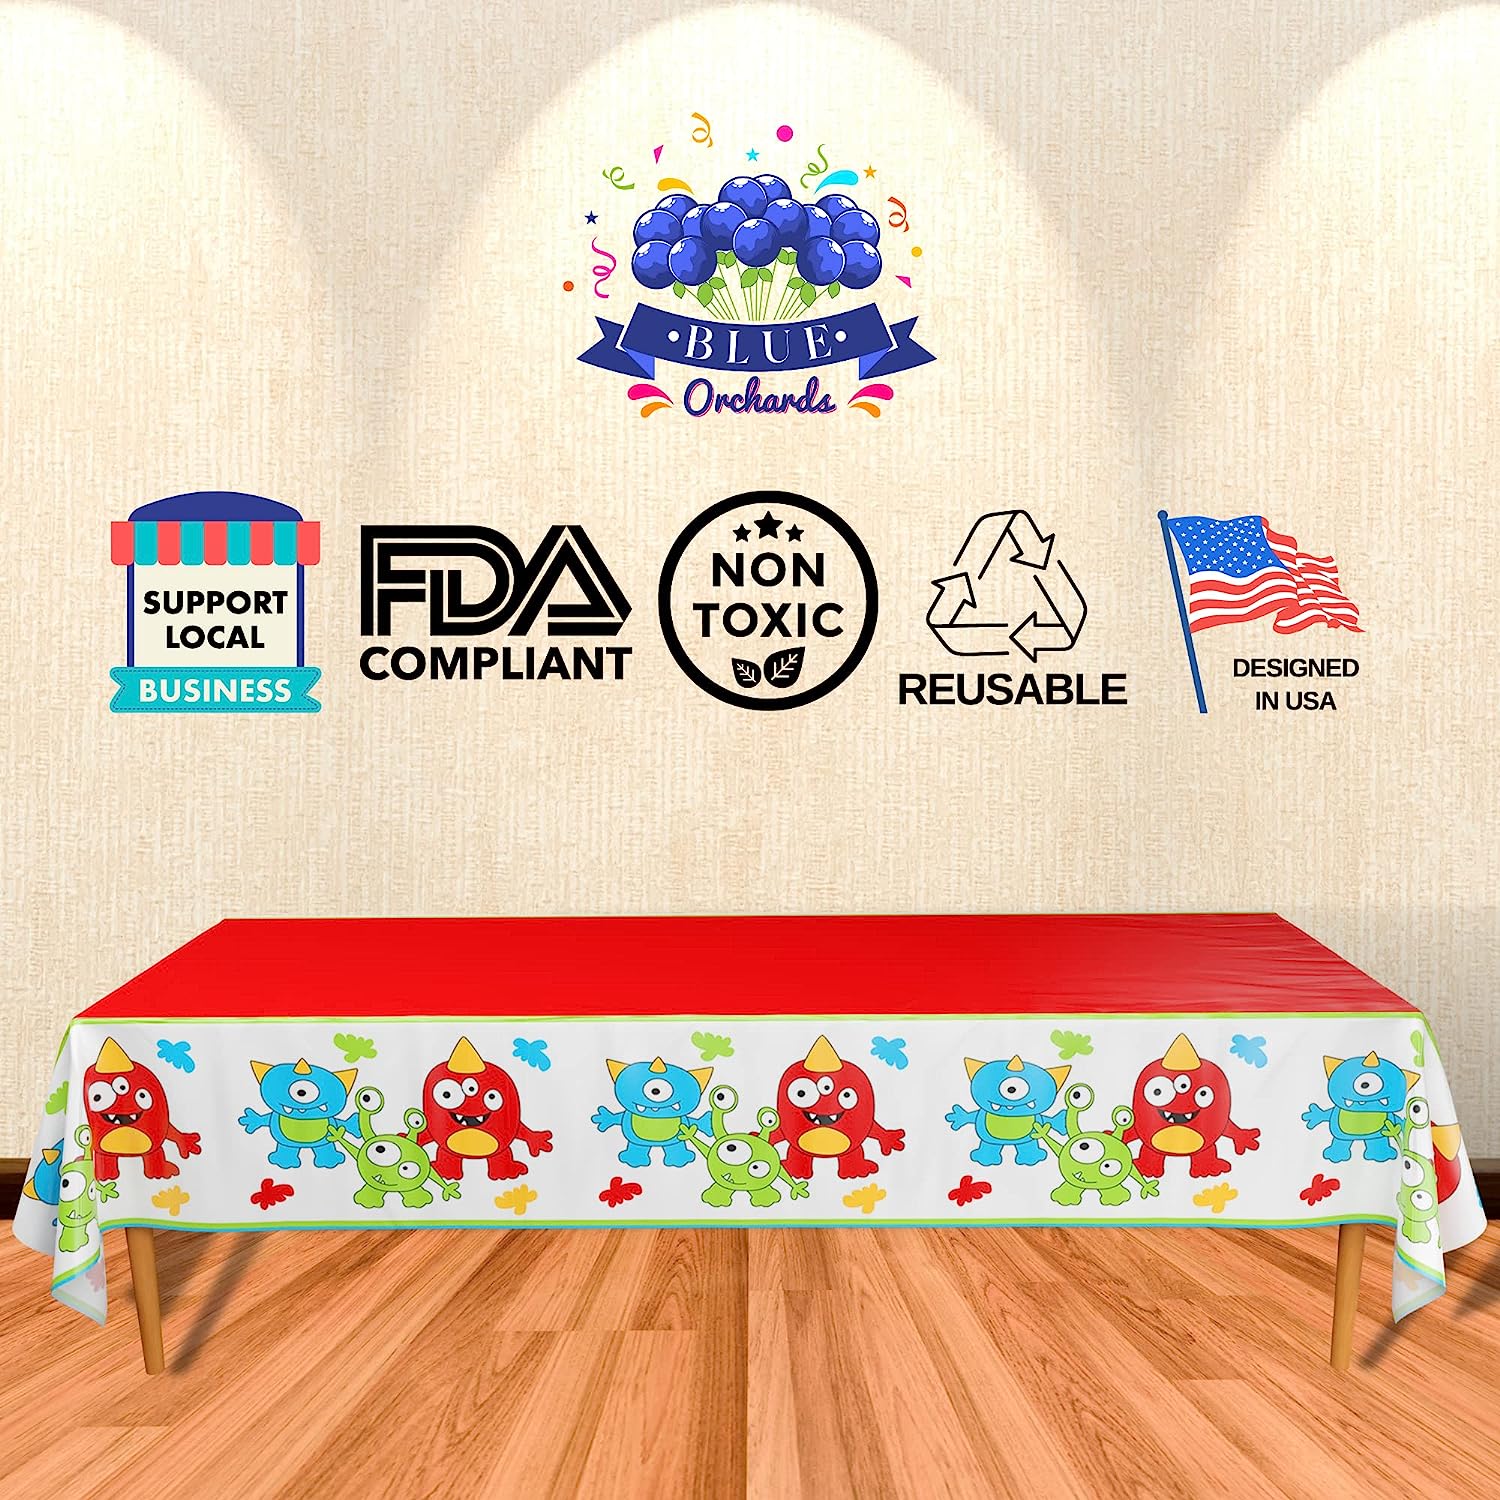 FDA Compliant, non toxic, reusable, and designed in USA Monster Party Table Covers (Pack of 2) - 54"x108" XL - Monster Party Supplies, Monster Birthday Party, Monster Themed 1st Birthday, Kids Monster Birthday, Monster Party Decorations